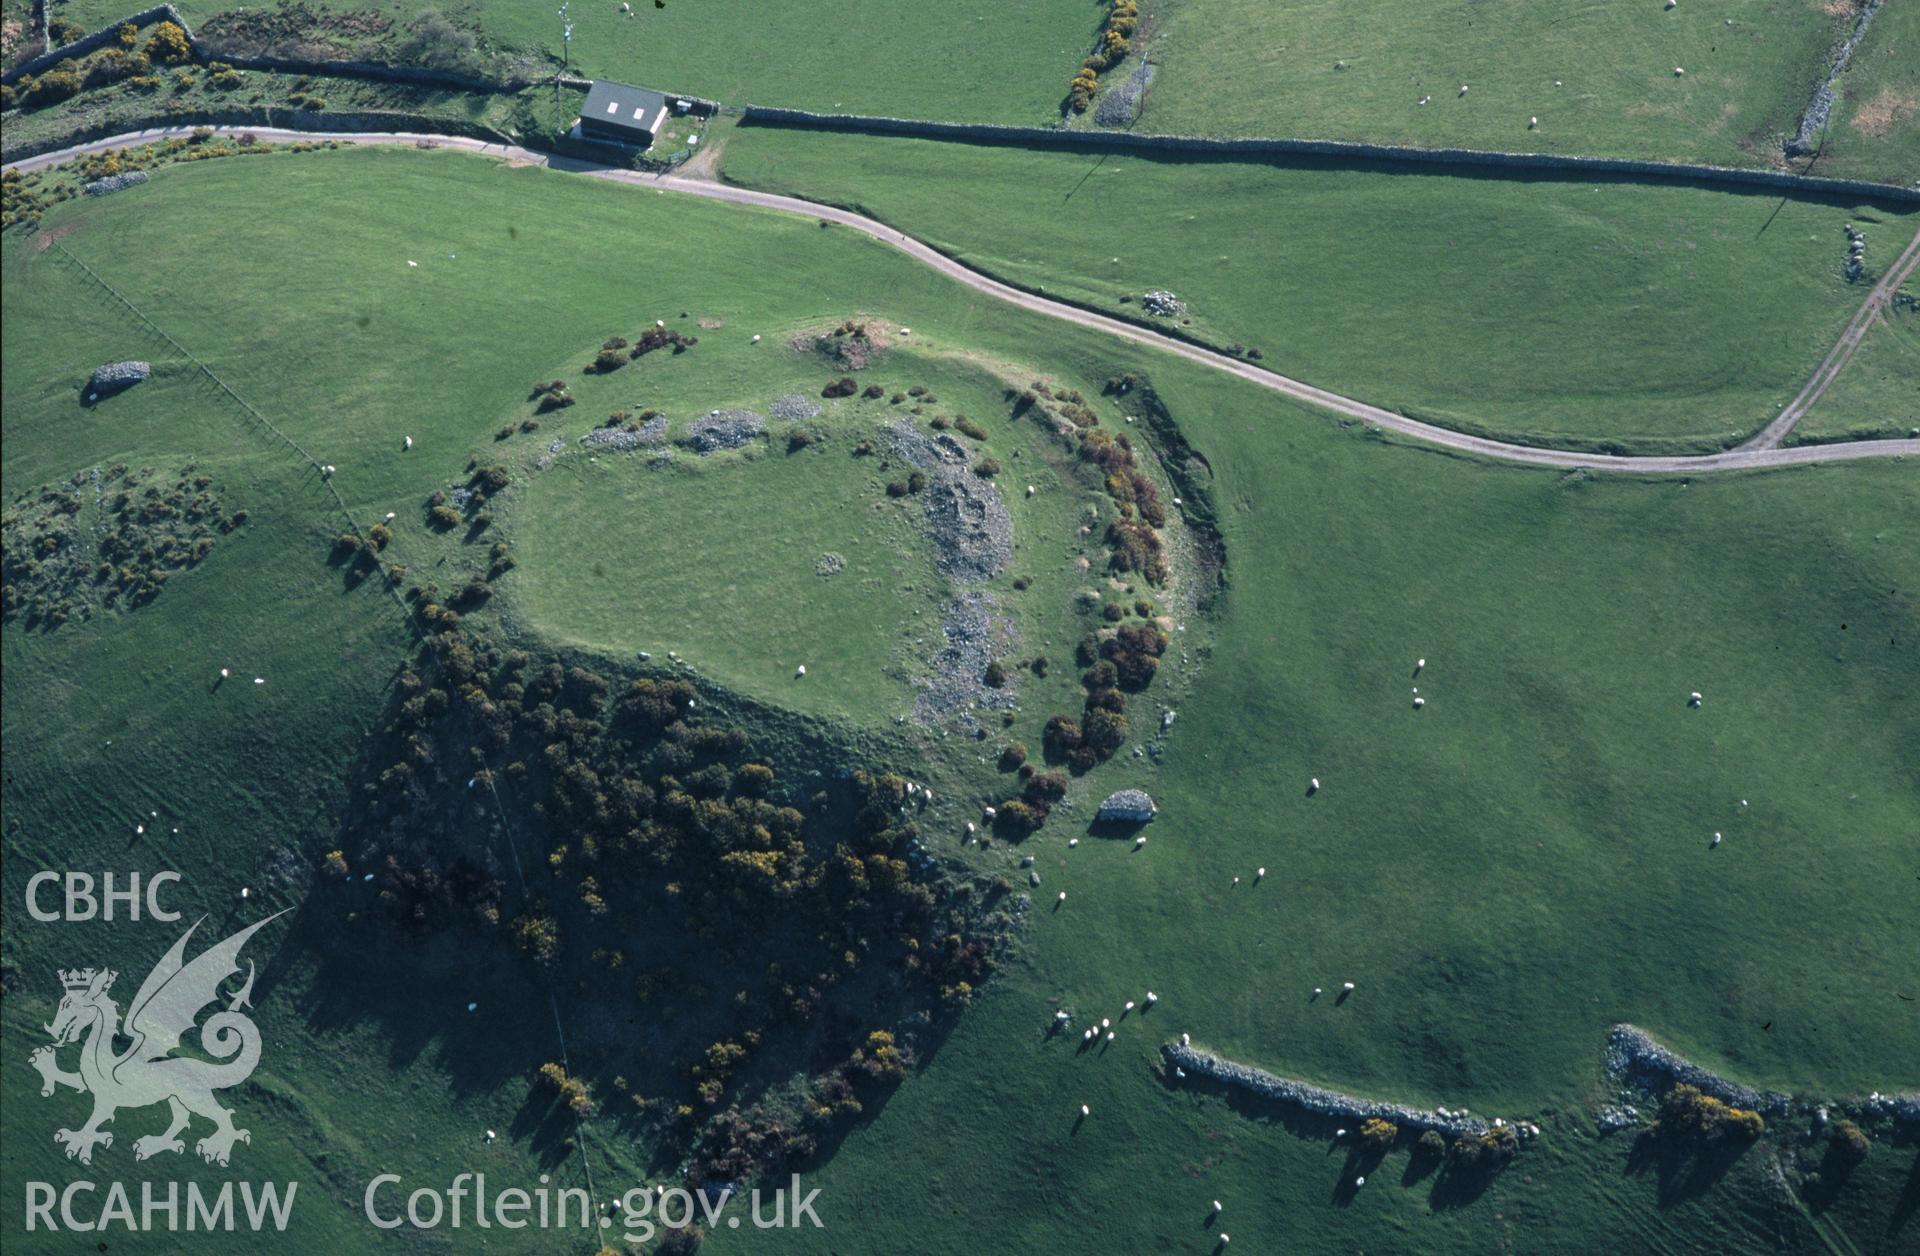 RCAHMW colour oblique aerial photograph of Castell-y-gaer taken on 12/04/1995 by C.R. Musson